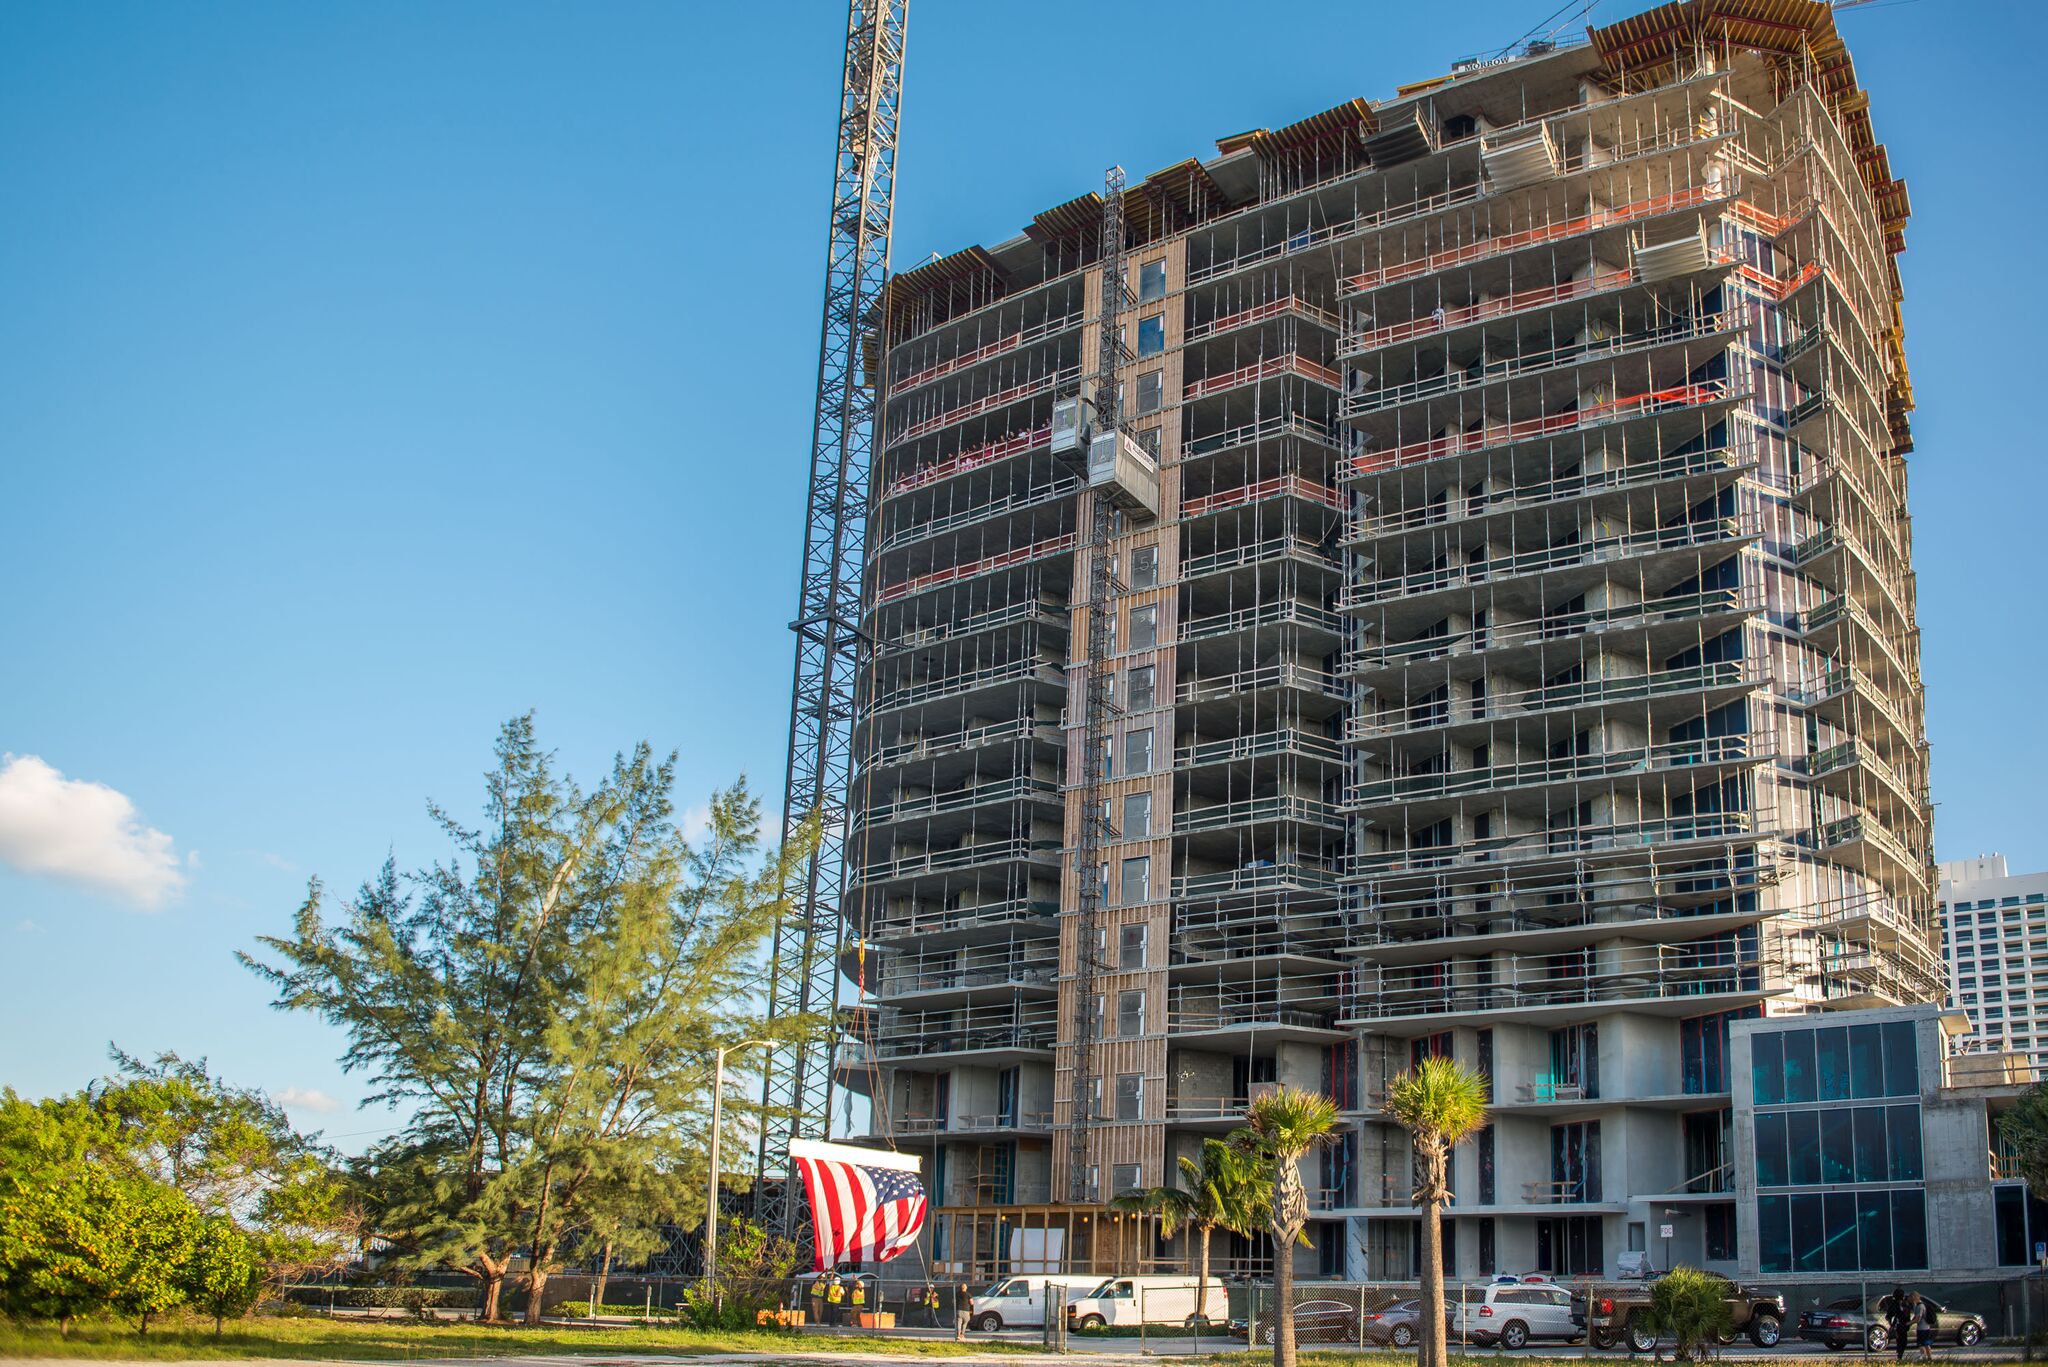 A new 18-story tower in Fort Lauderdale that was recently constructed just topped off.